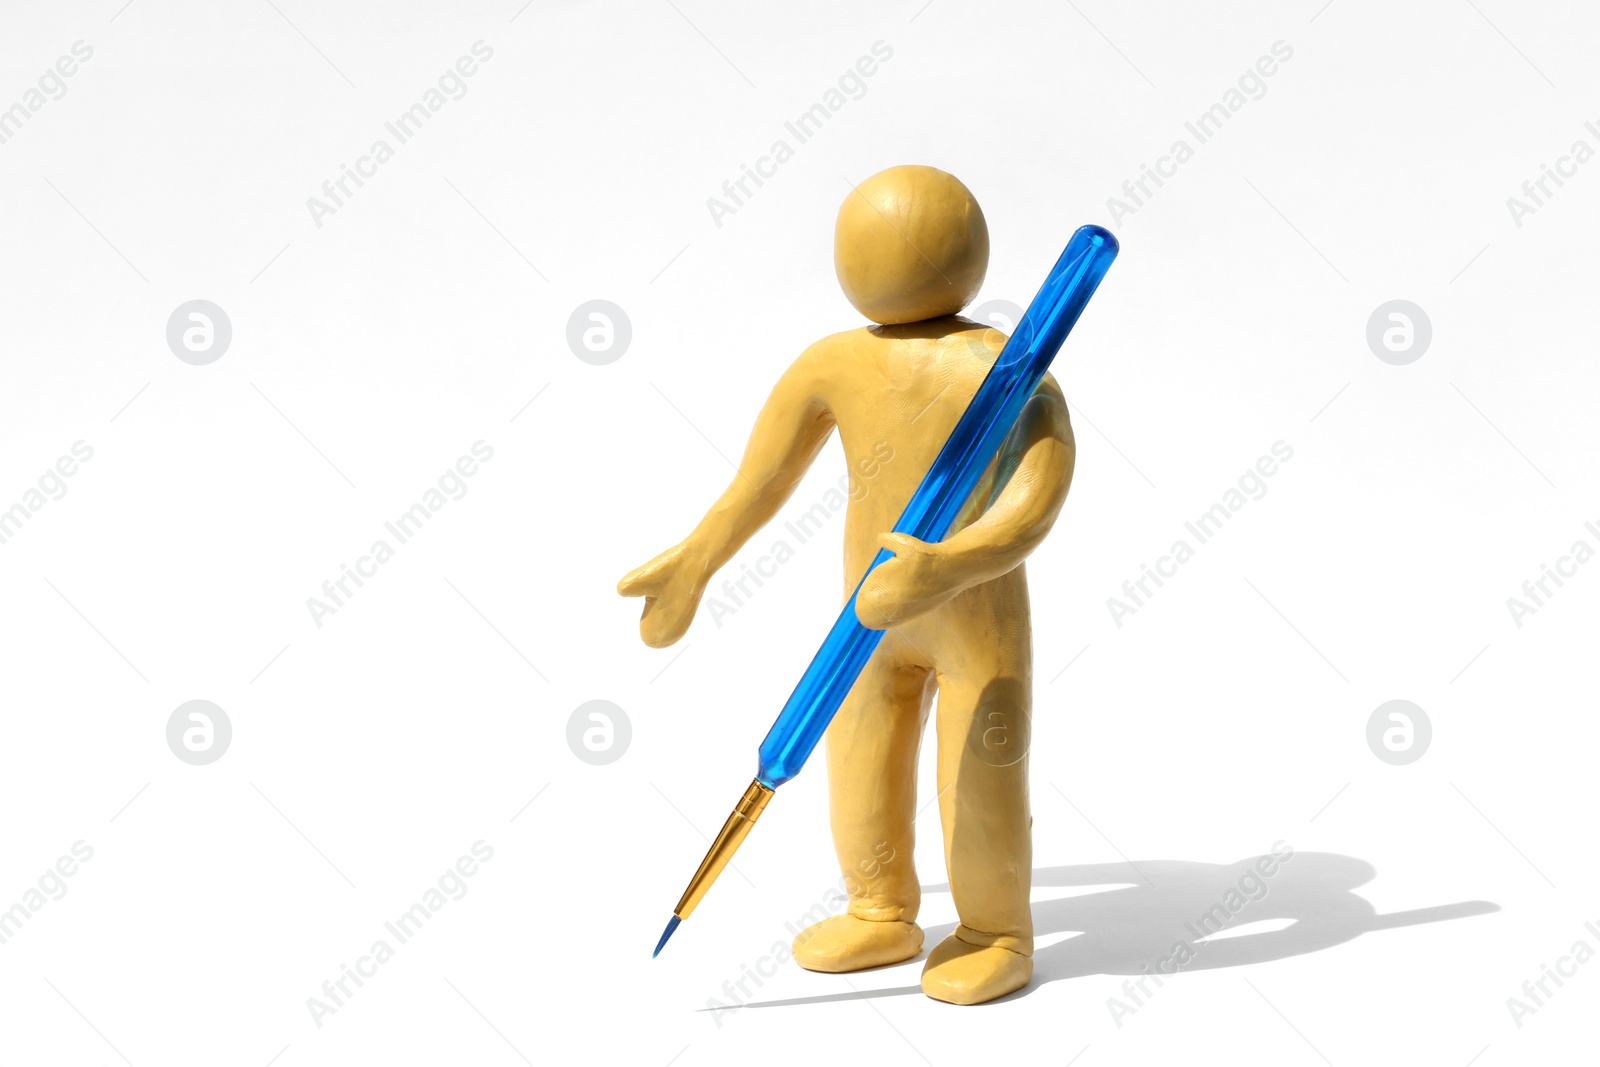 Photo of Human figure made of yellow plasticine holding paintbrush on white background. Space for text